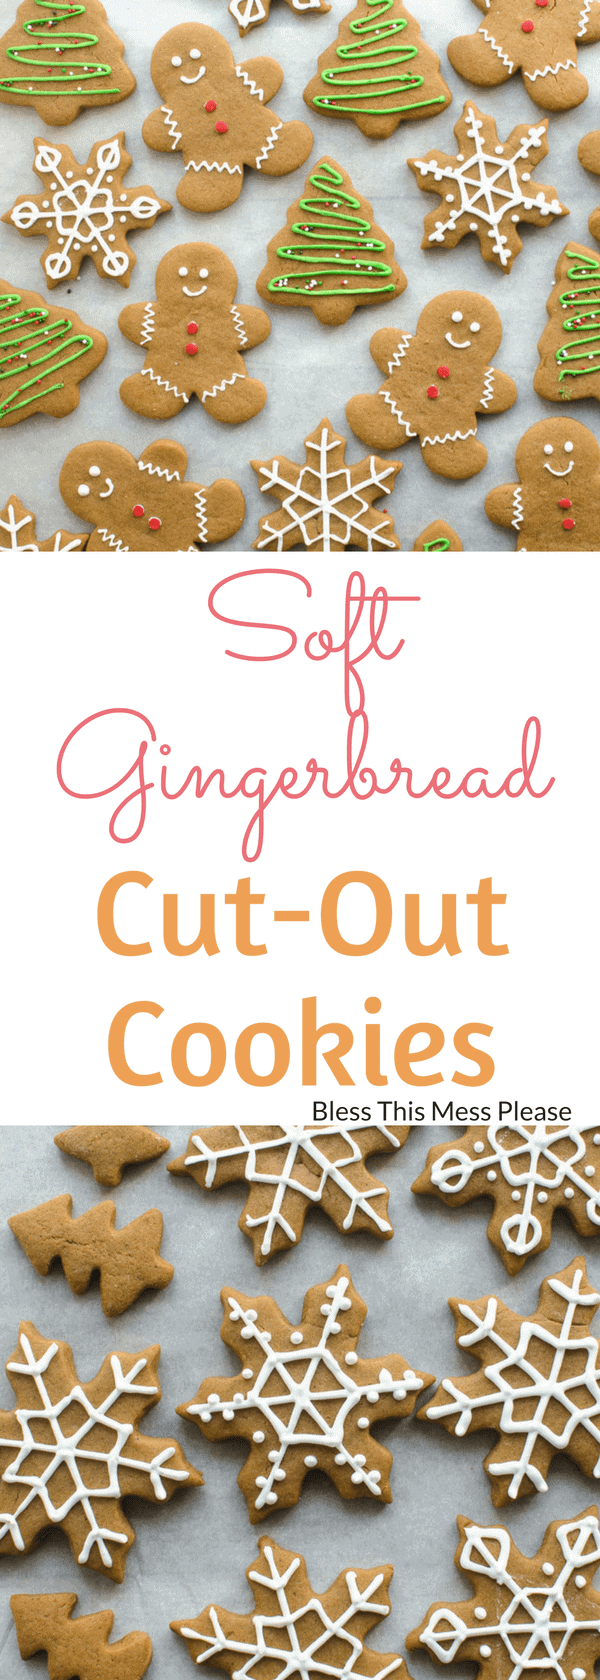 Soft Gingerbread Cut-Out Cookies - Bless This Mess